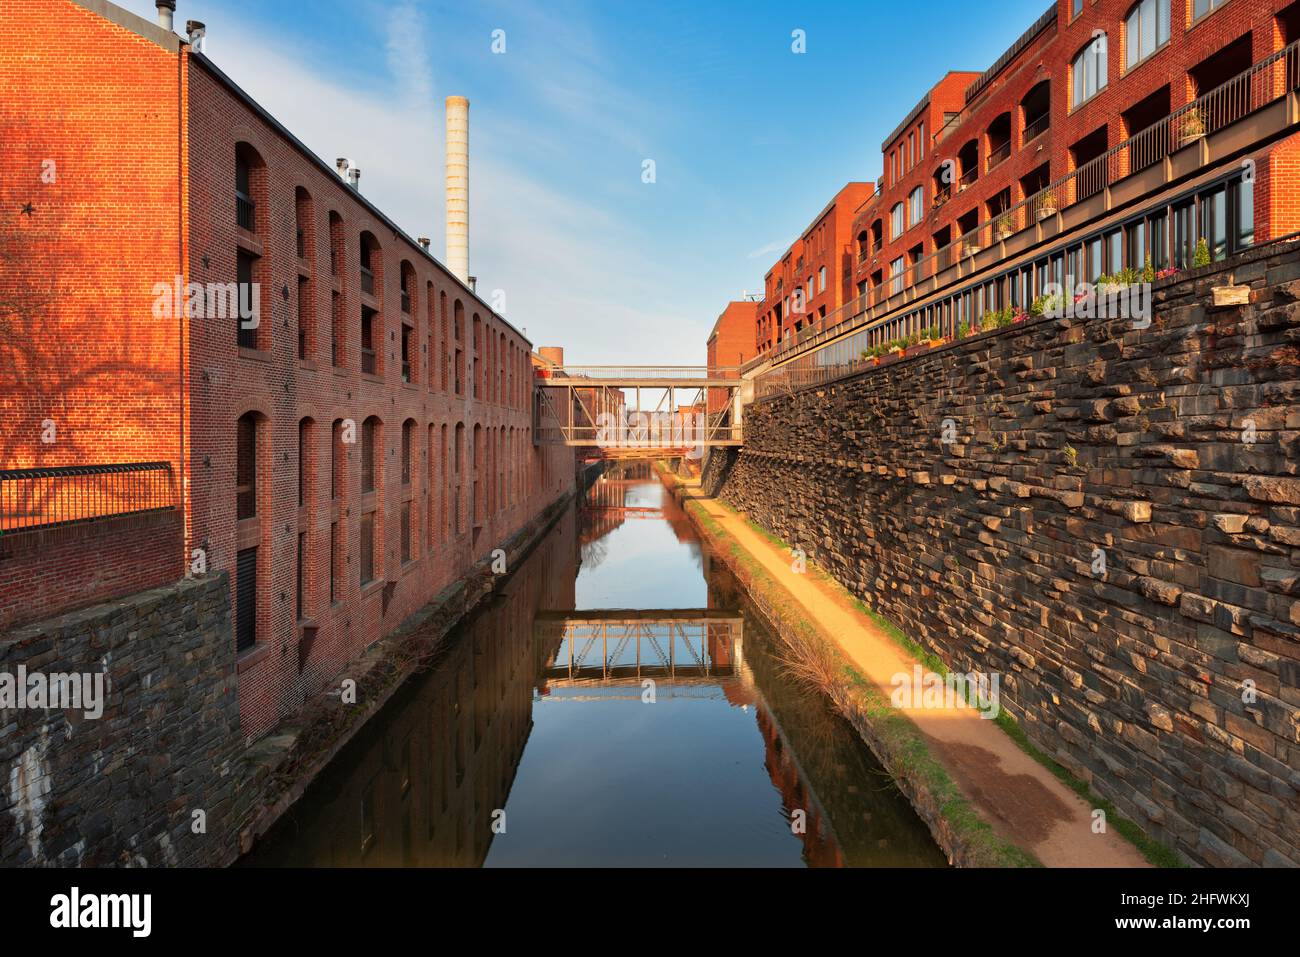 Georgetown, Washington DC, USA historic old brick warehouses and canals. Stock Photo